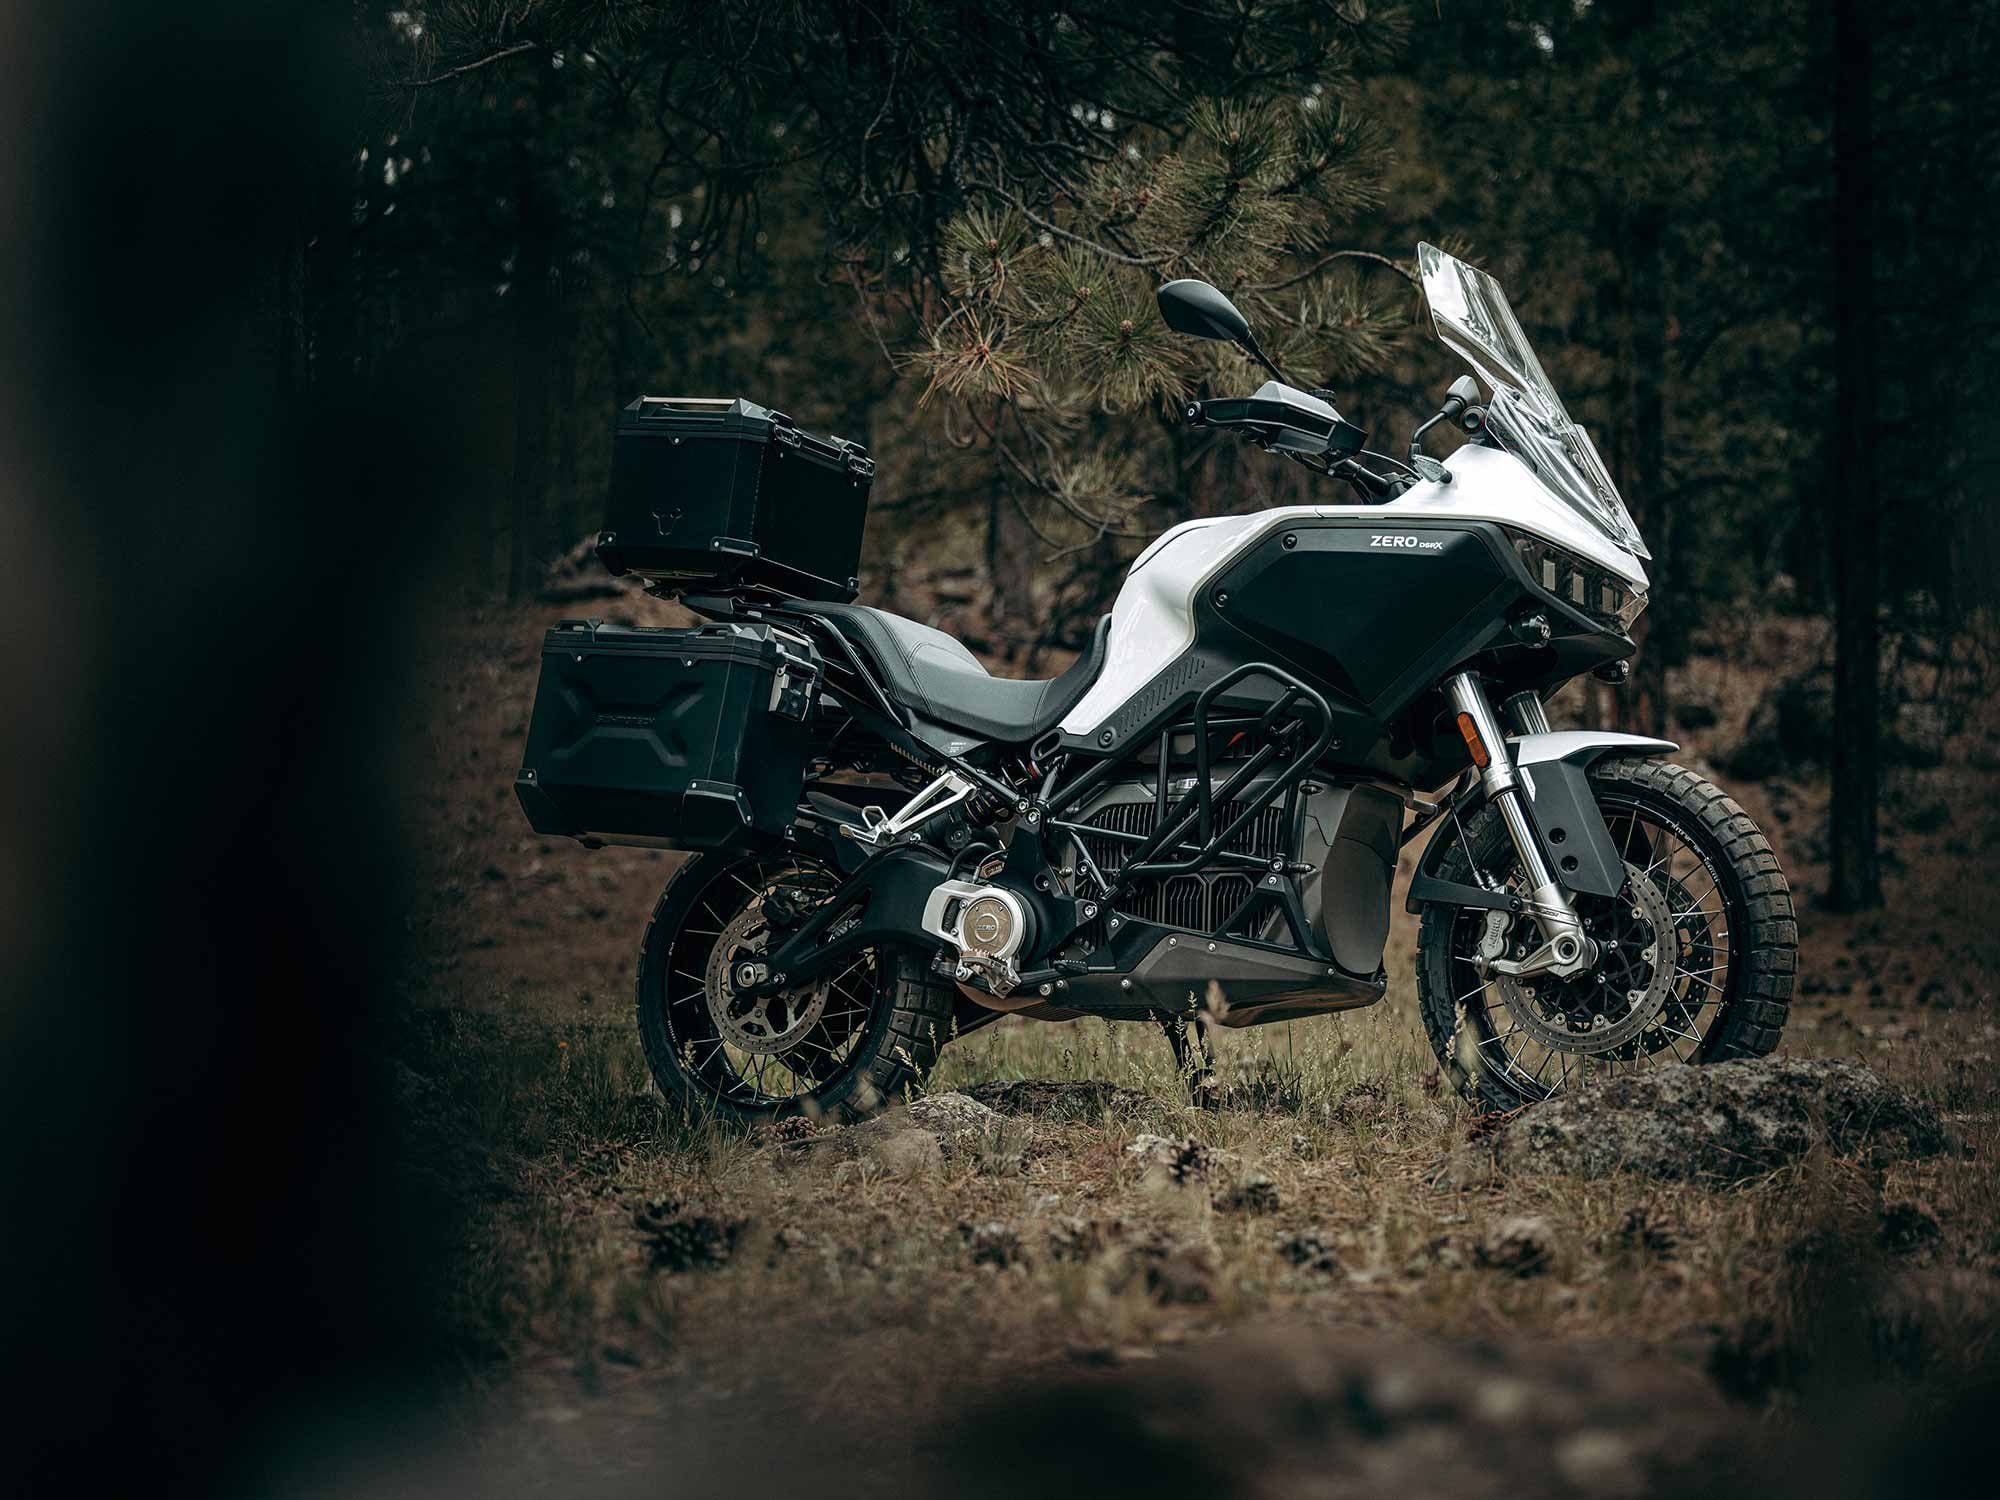 Zero’s DSR/X has the largest battery yet, increasing range—a must have for adventure riding.